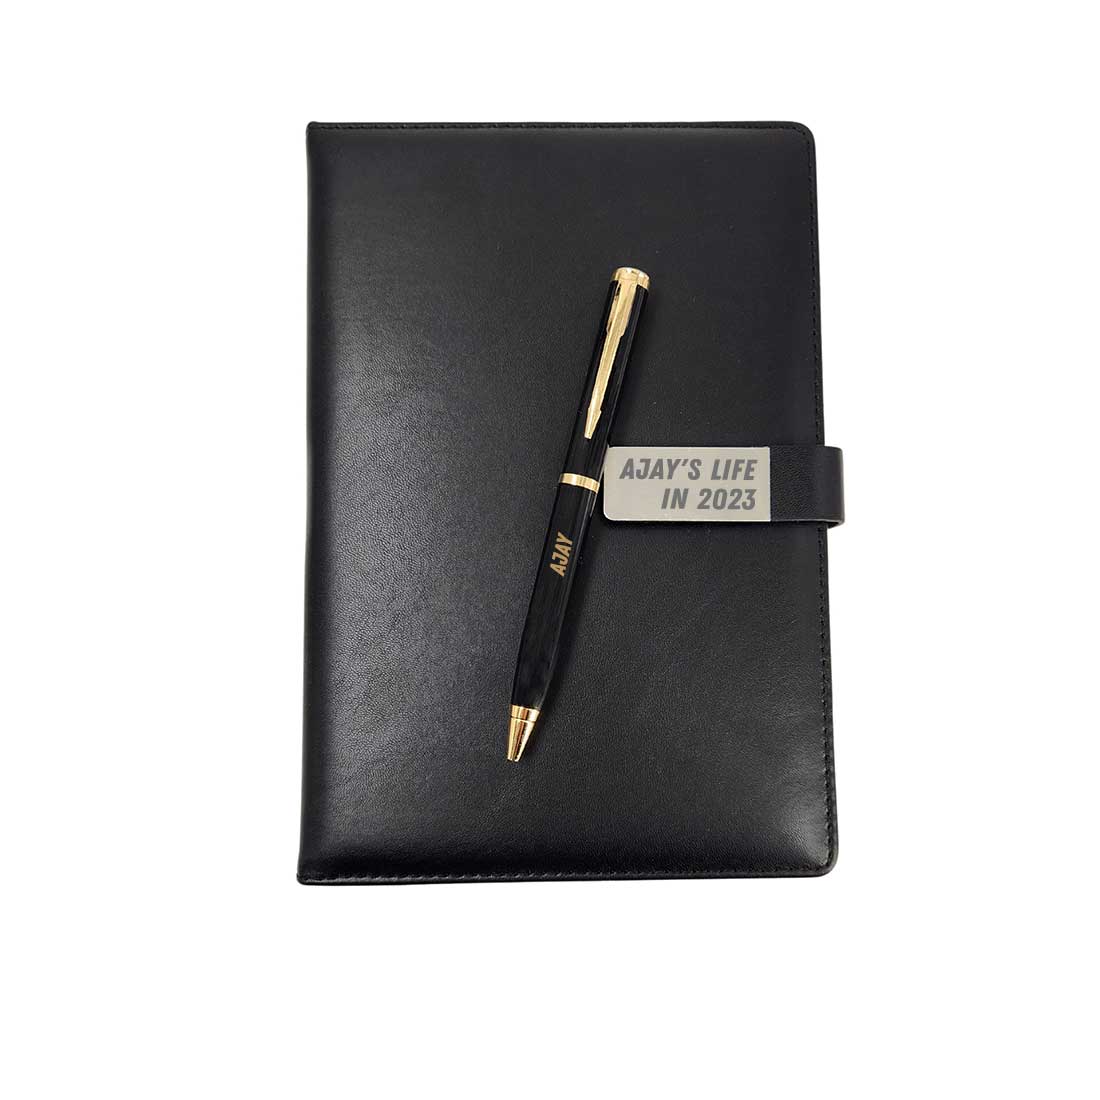 FABULASTIC 2 in 1 Corporate Gift Set with Journal Diary & Metal Pen,  Valentine Gift for Husband, Boyfriend, Wife, Girlfriend, Brother, Sister,  Father, Birthday, Anniversary : Amazon.in: Toys & Games